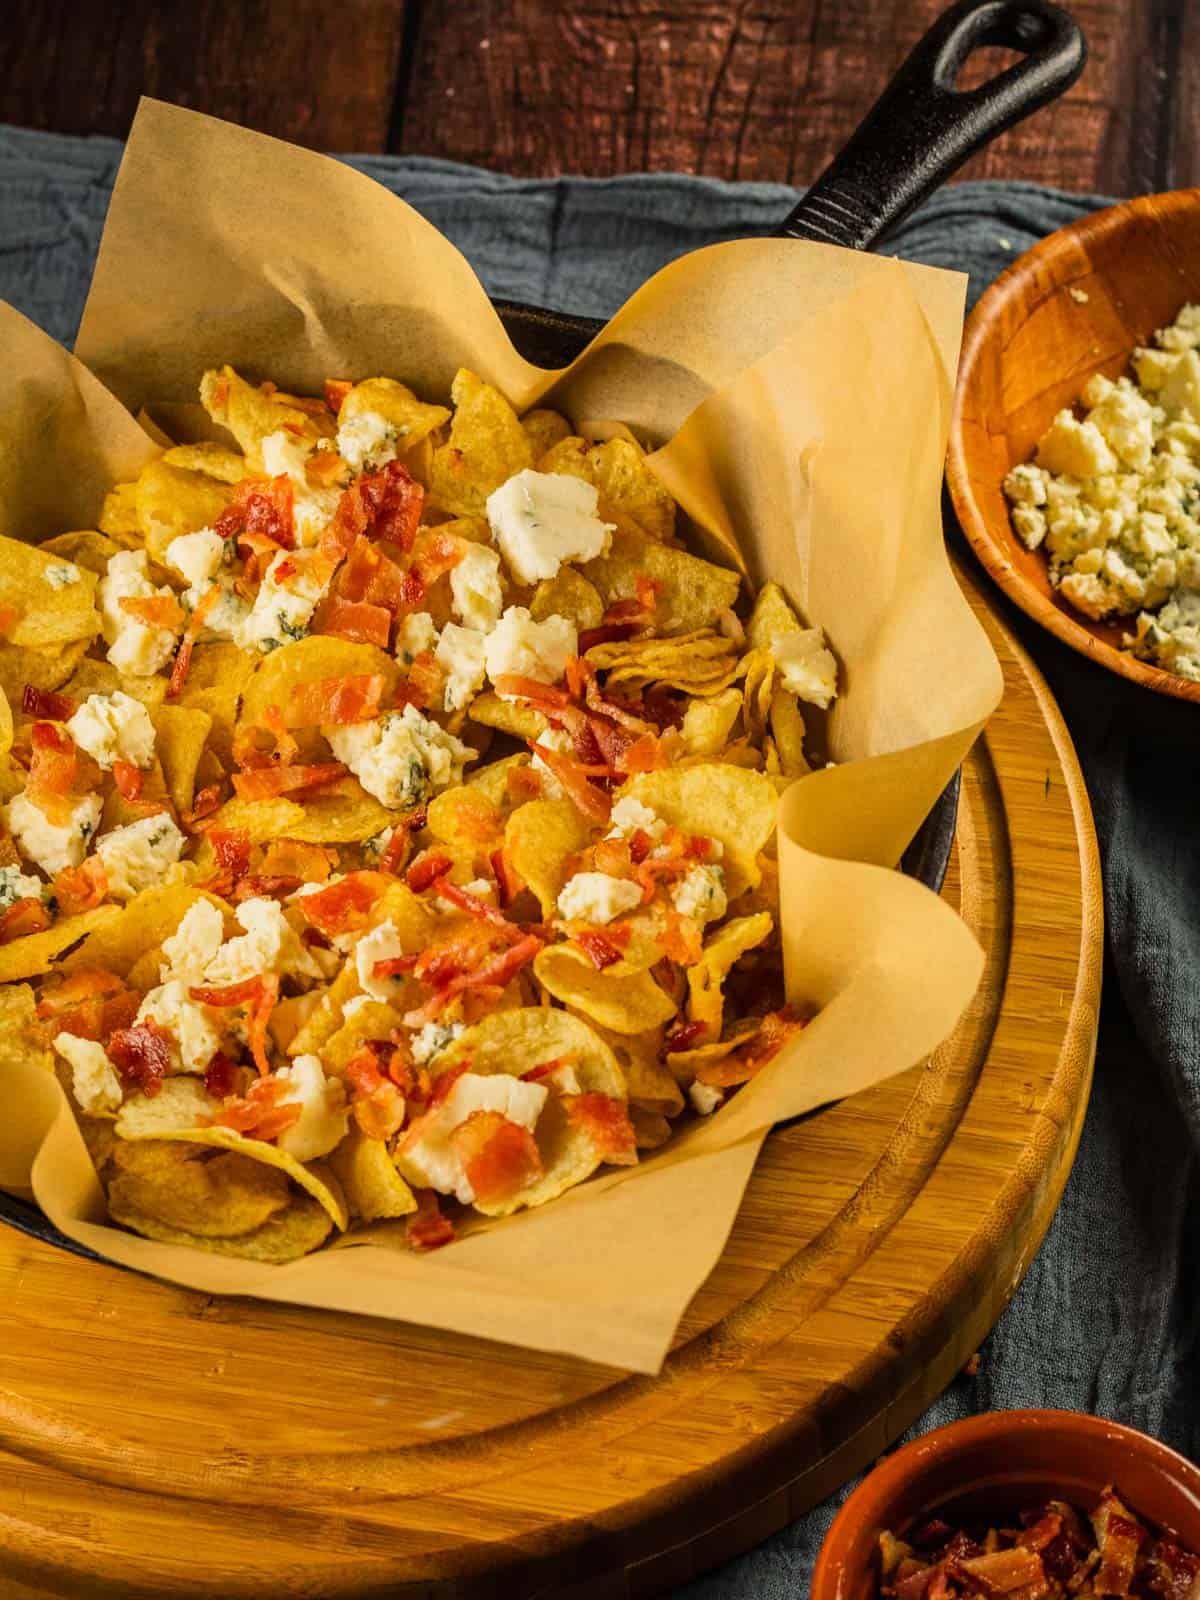 kettle chips sprinkled with bacon pieces and blue cheese crumbles